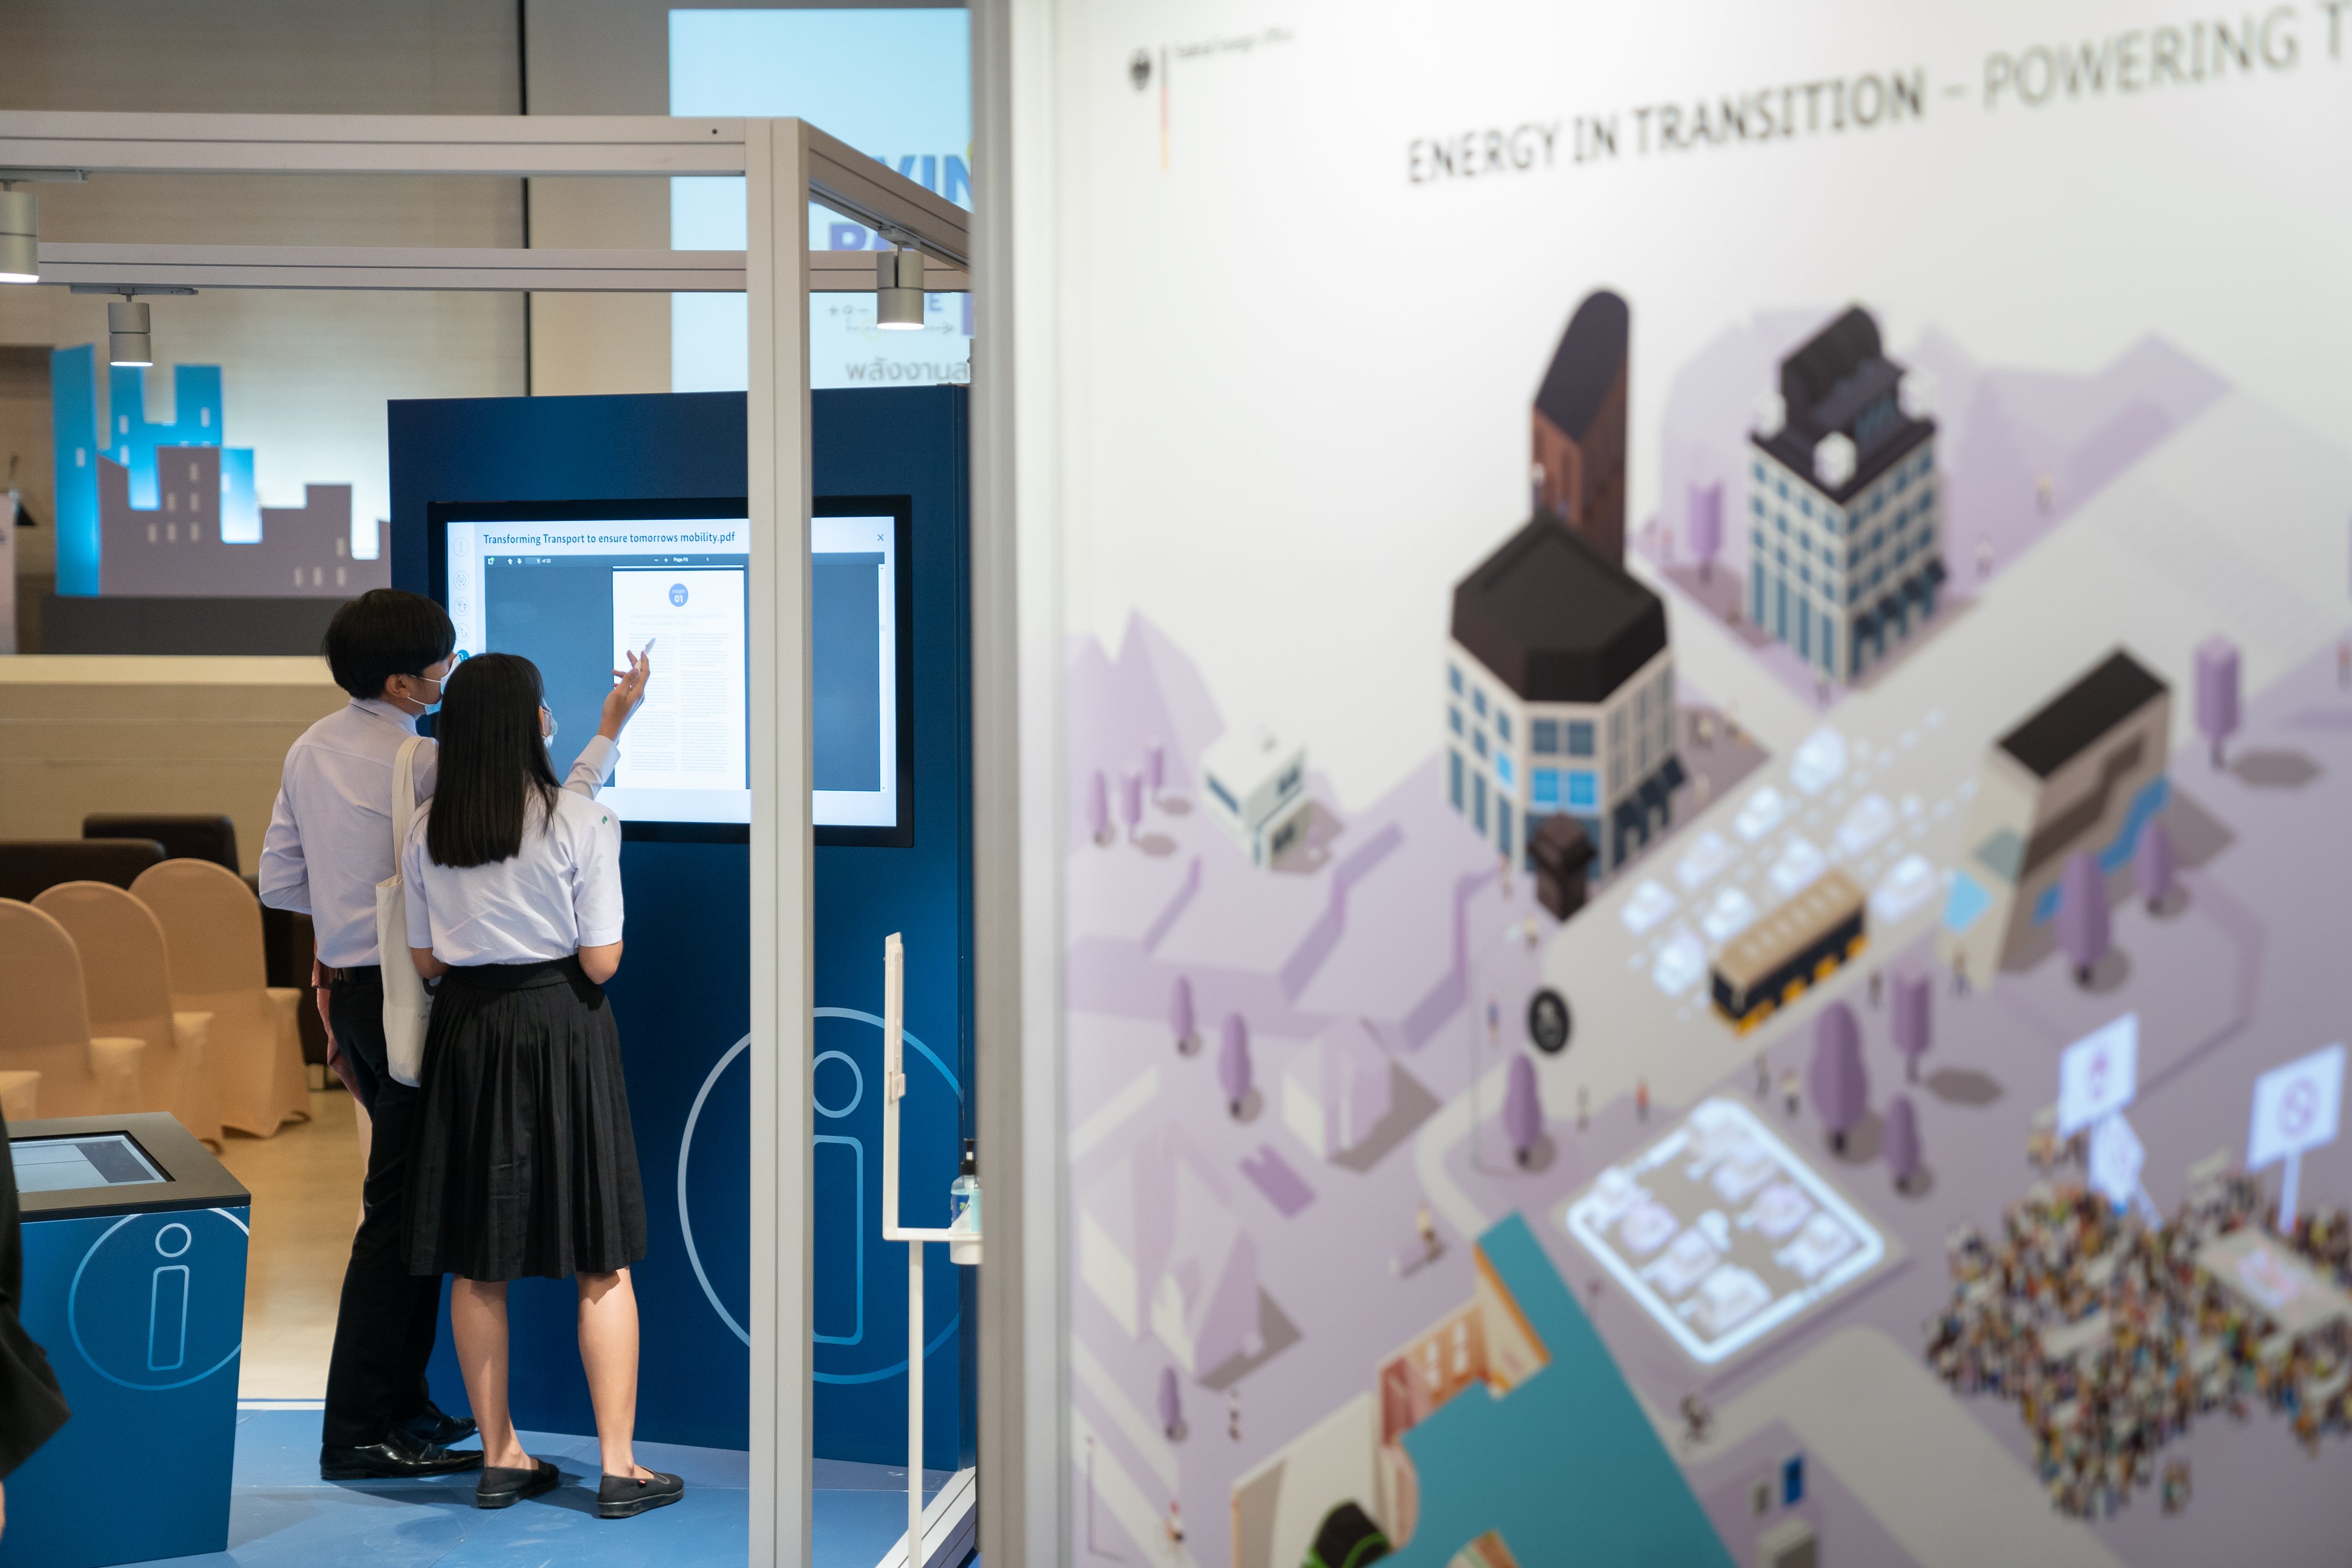 In the forefront, the photo shows one side of the "Energy Transition Cube". In the background, there are a man and a woman standing at the "Info Lounge". Both are looking at the touch screen.